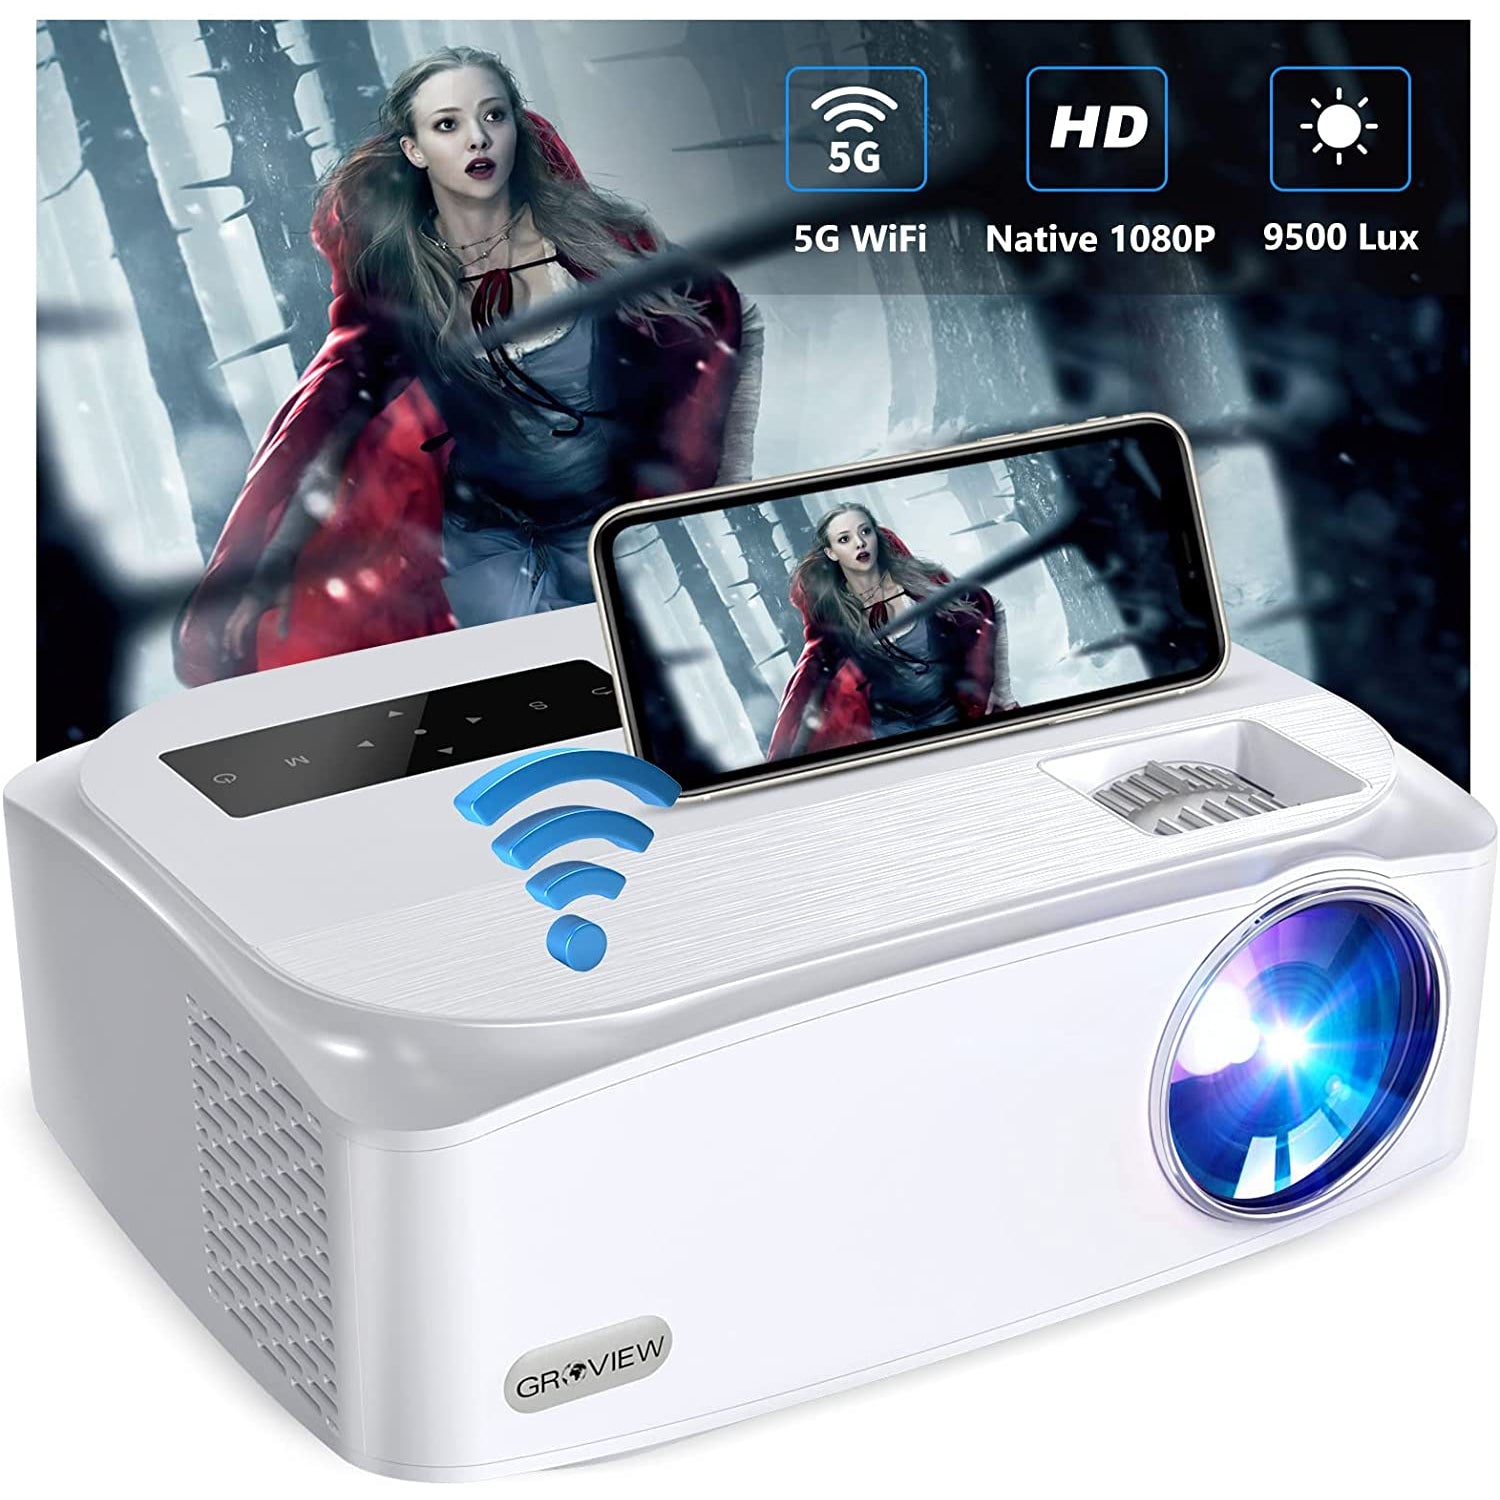 Groview BL-89 Full HD Outdoor Projector With Zoom Function and 300''Display Screen Size